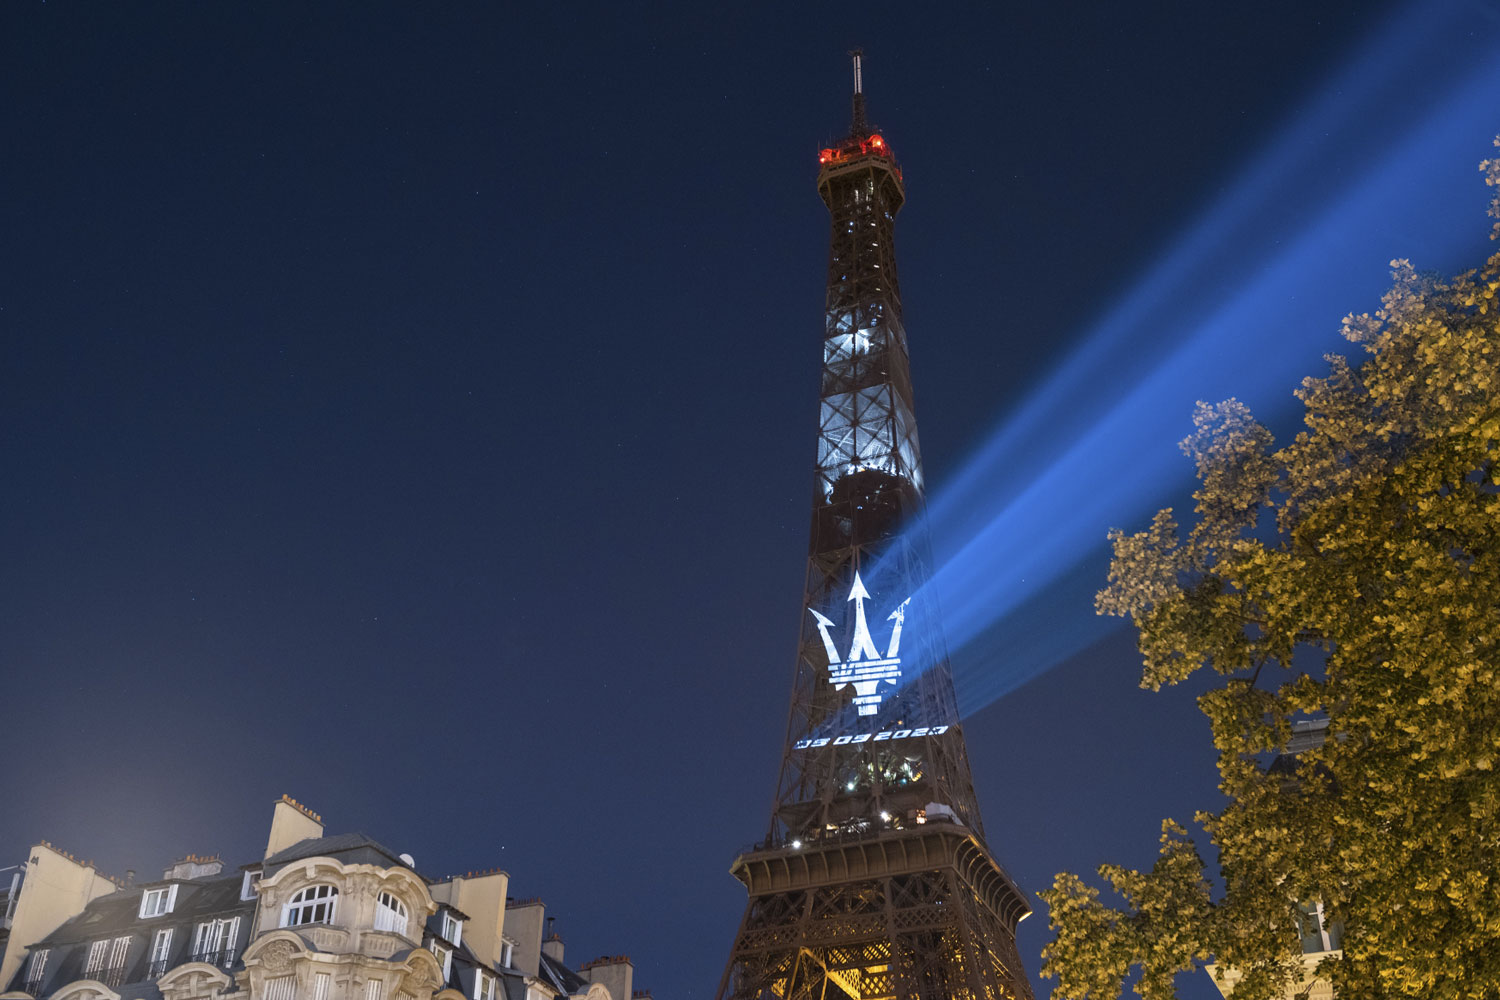 Paris projection, Street projection, mapping projection, where light falls